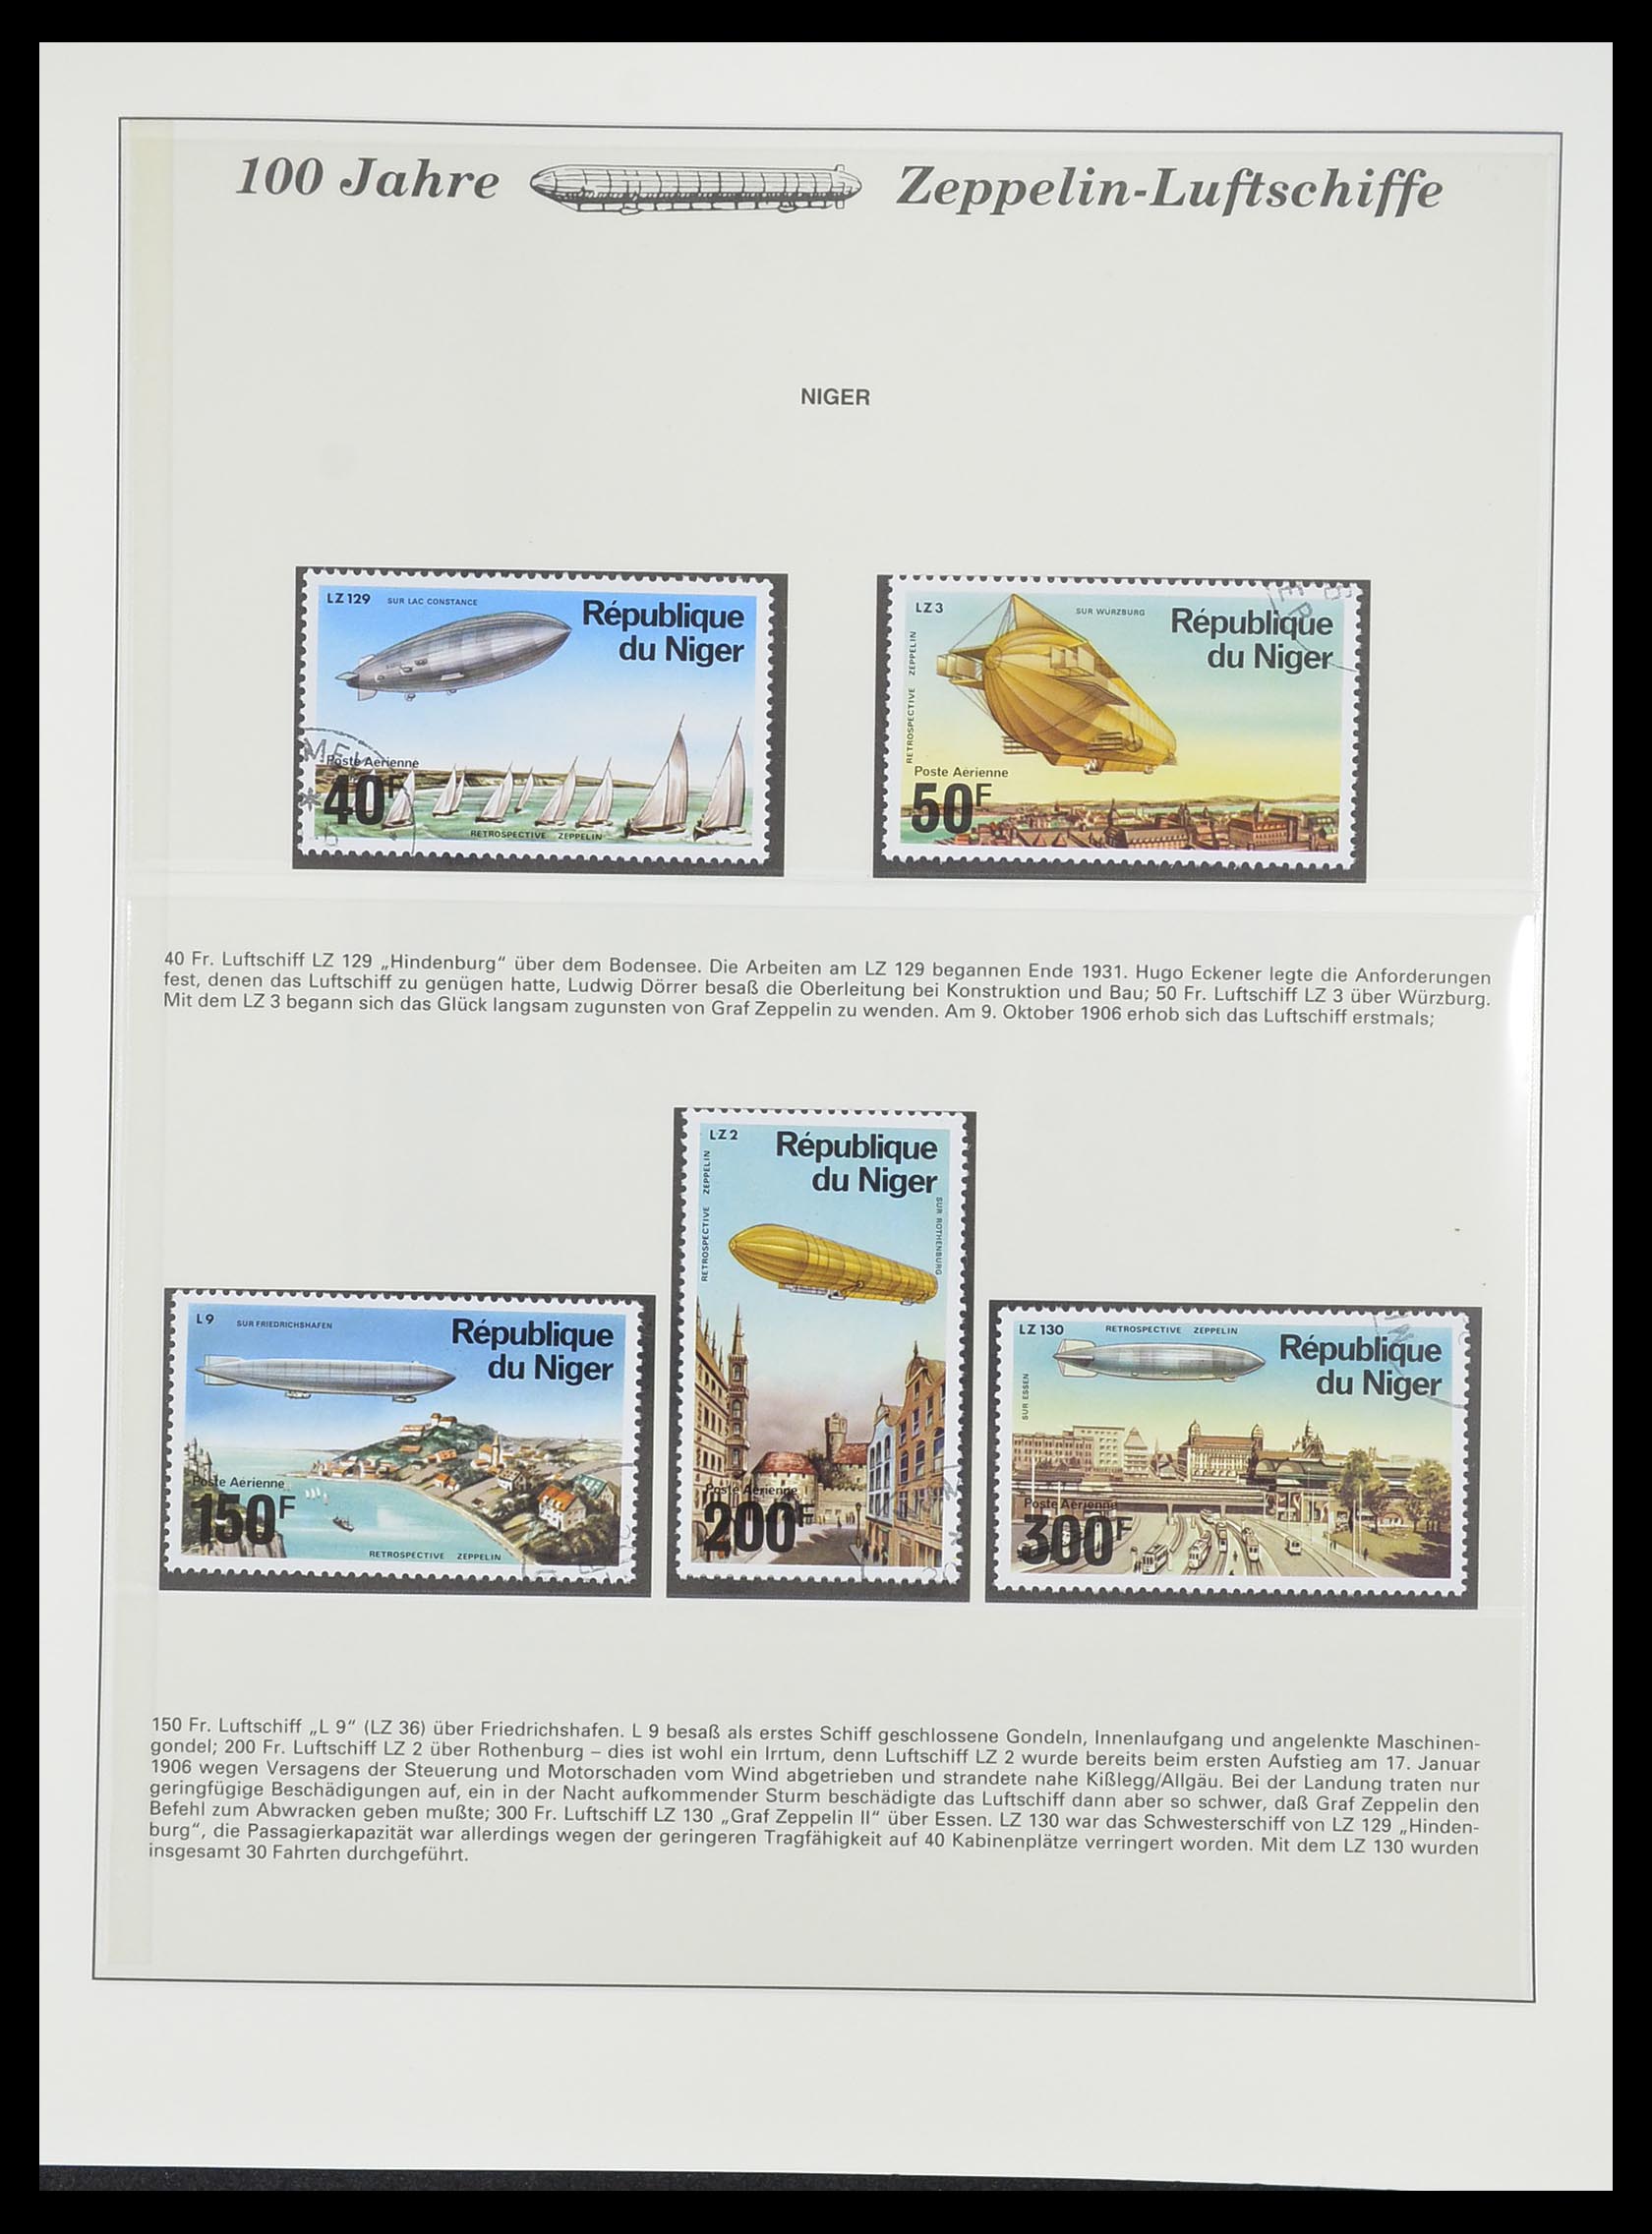 33307 881 - Stamp collection 33307 Thematic Zeppelin 1952-2010!